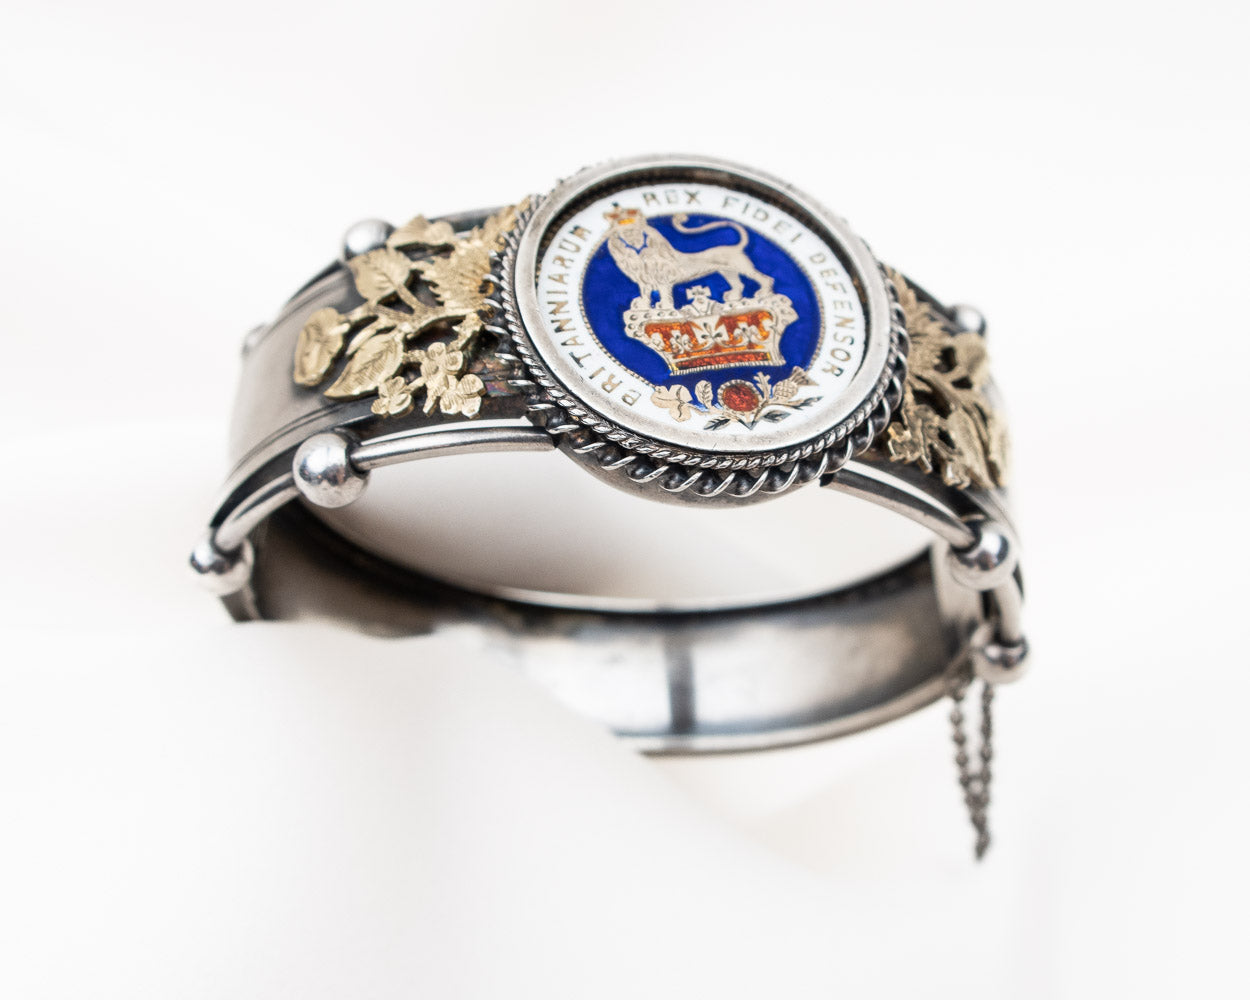 Victorian Bangle with George IV Seal